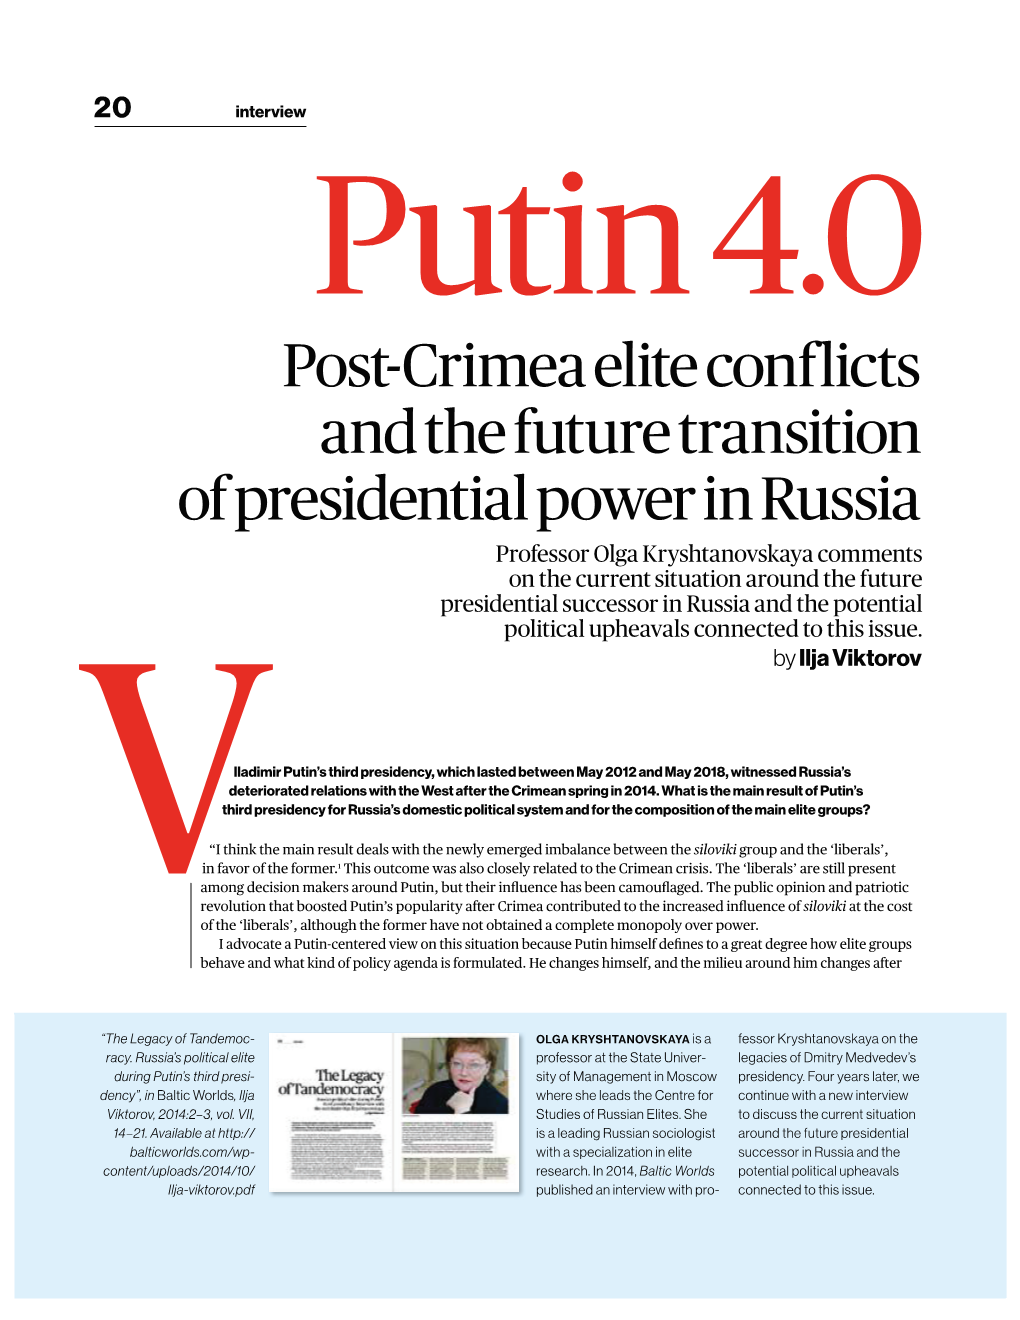 Post-Crimea Elite Conflicts and the Future Transition Of